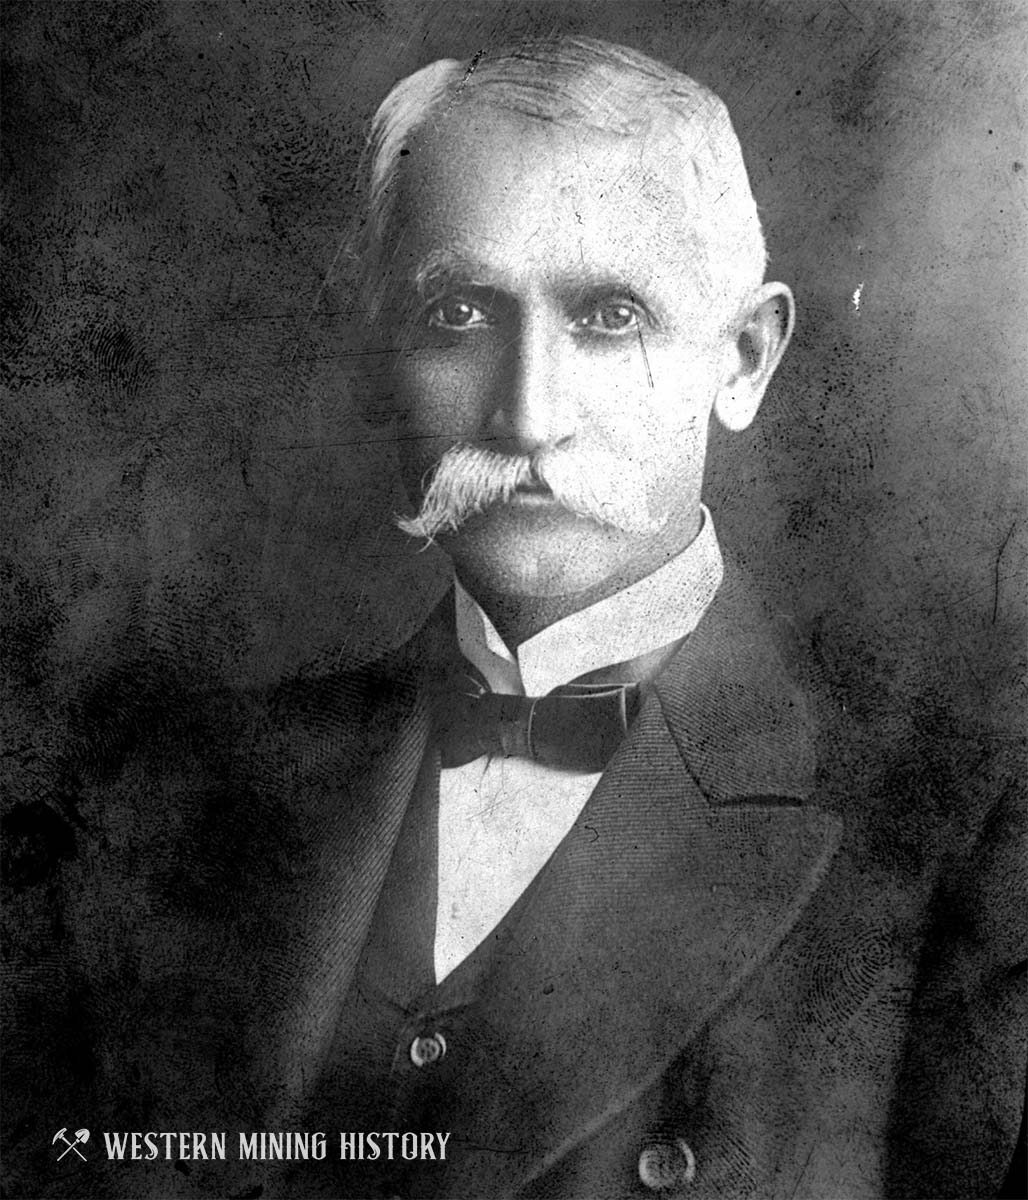 Winfield Scott Stratton - discoverer of the Independence Mine